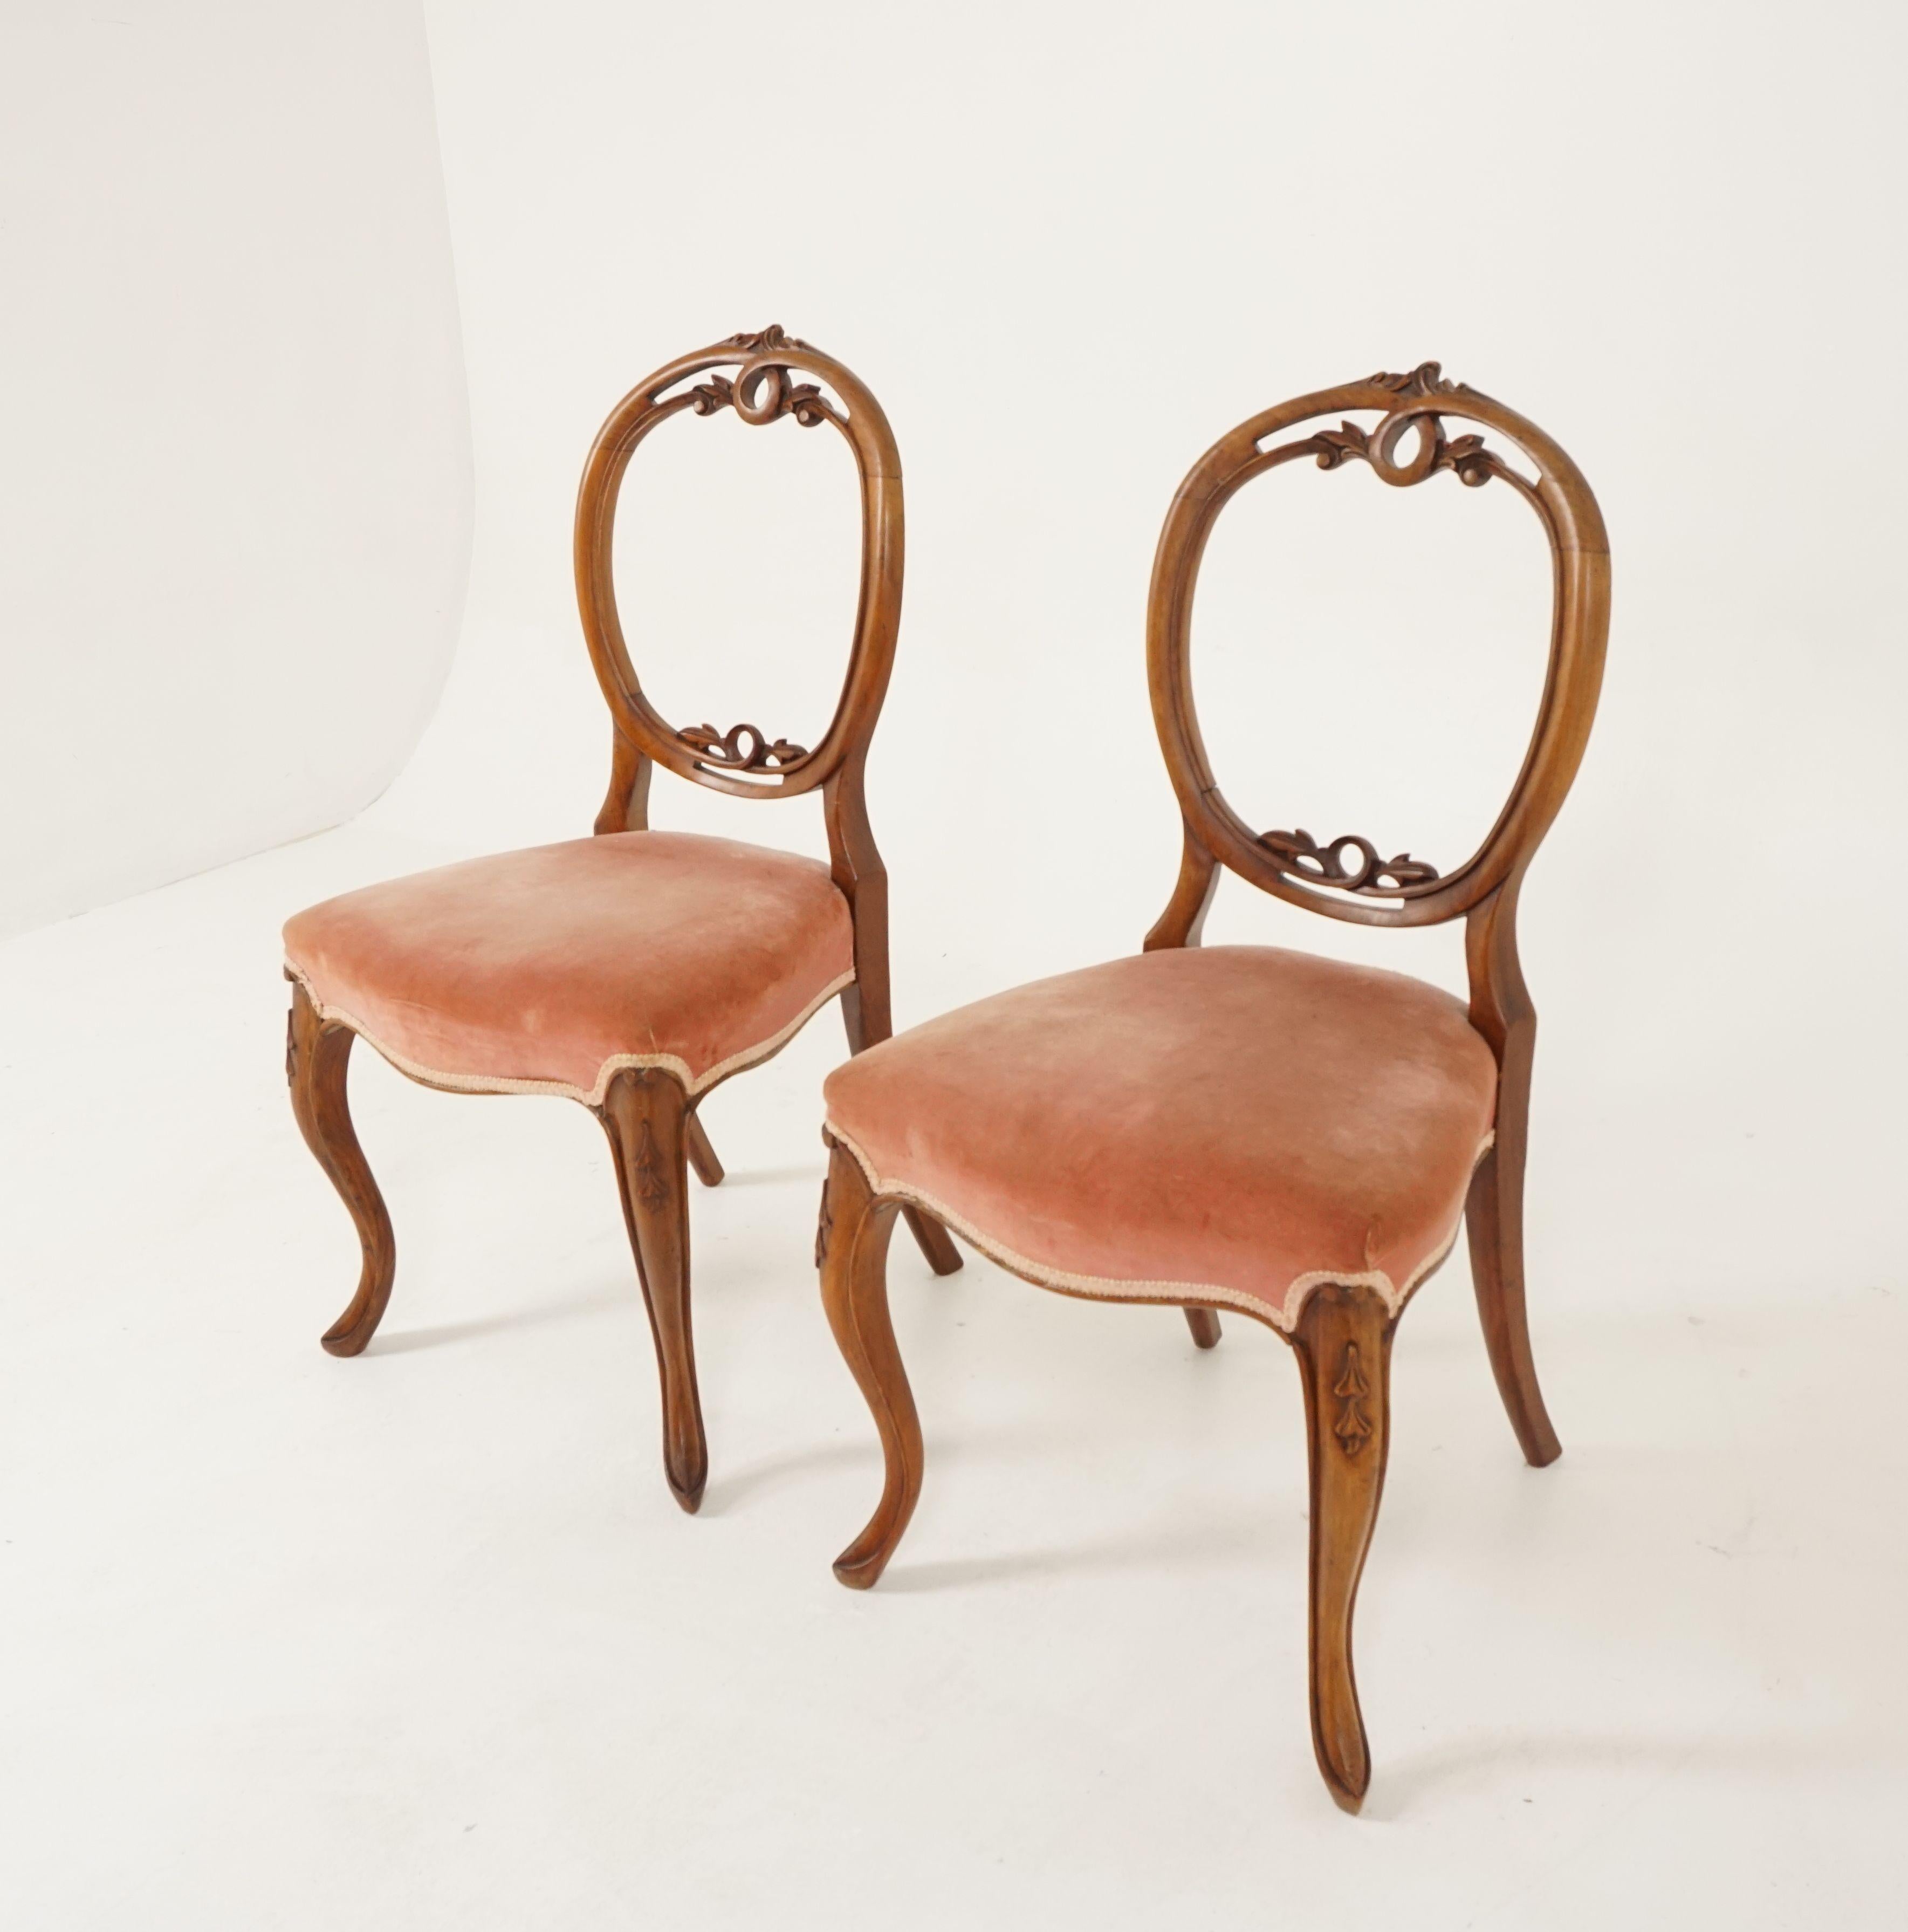 Antique Victorian Balloon back chairs, rosewood, set of 2, Scotland 1870, B2482

Scotland 1870
Solid rosewood
Original finish
An elegant pair of antique Victorian balloon back chairs
Beautiful carving to the top rails, backs and legs
With